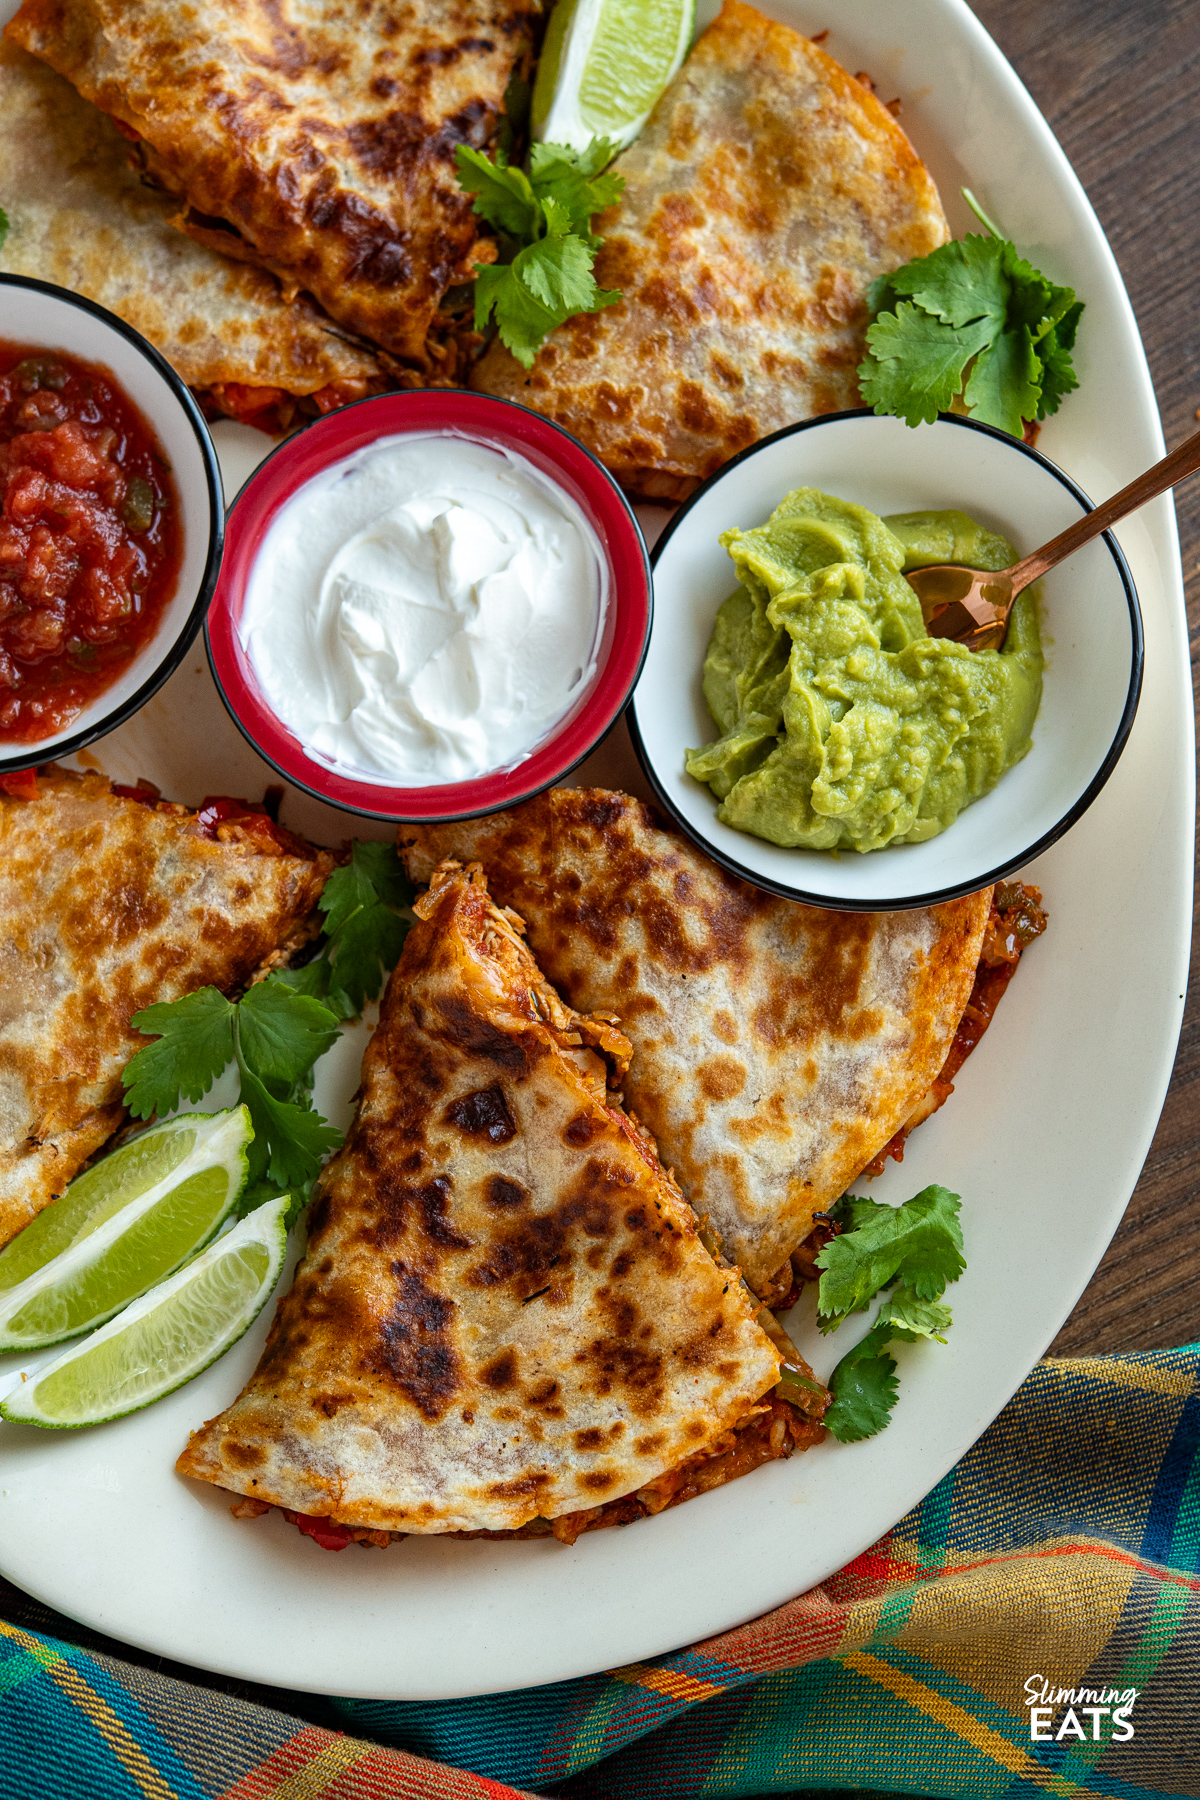 Sliced quesadilla arranged on a large cream oval plate, accompanied by small bowls of guacamole, salsa, and soured cream, garnished with scattered coriander leaves and lime wedges.